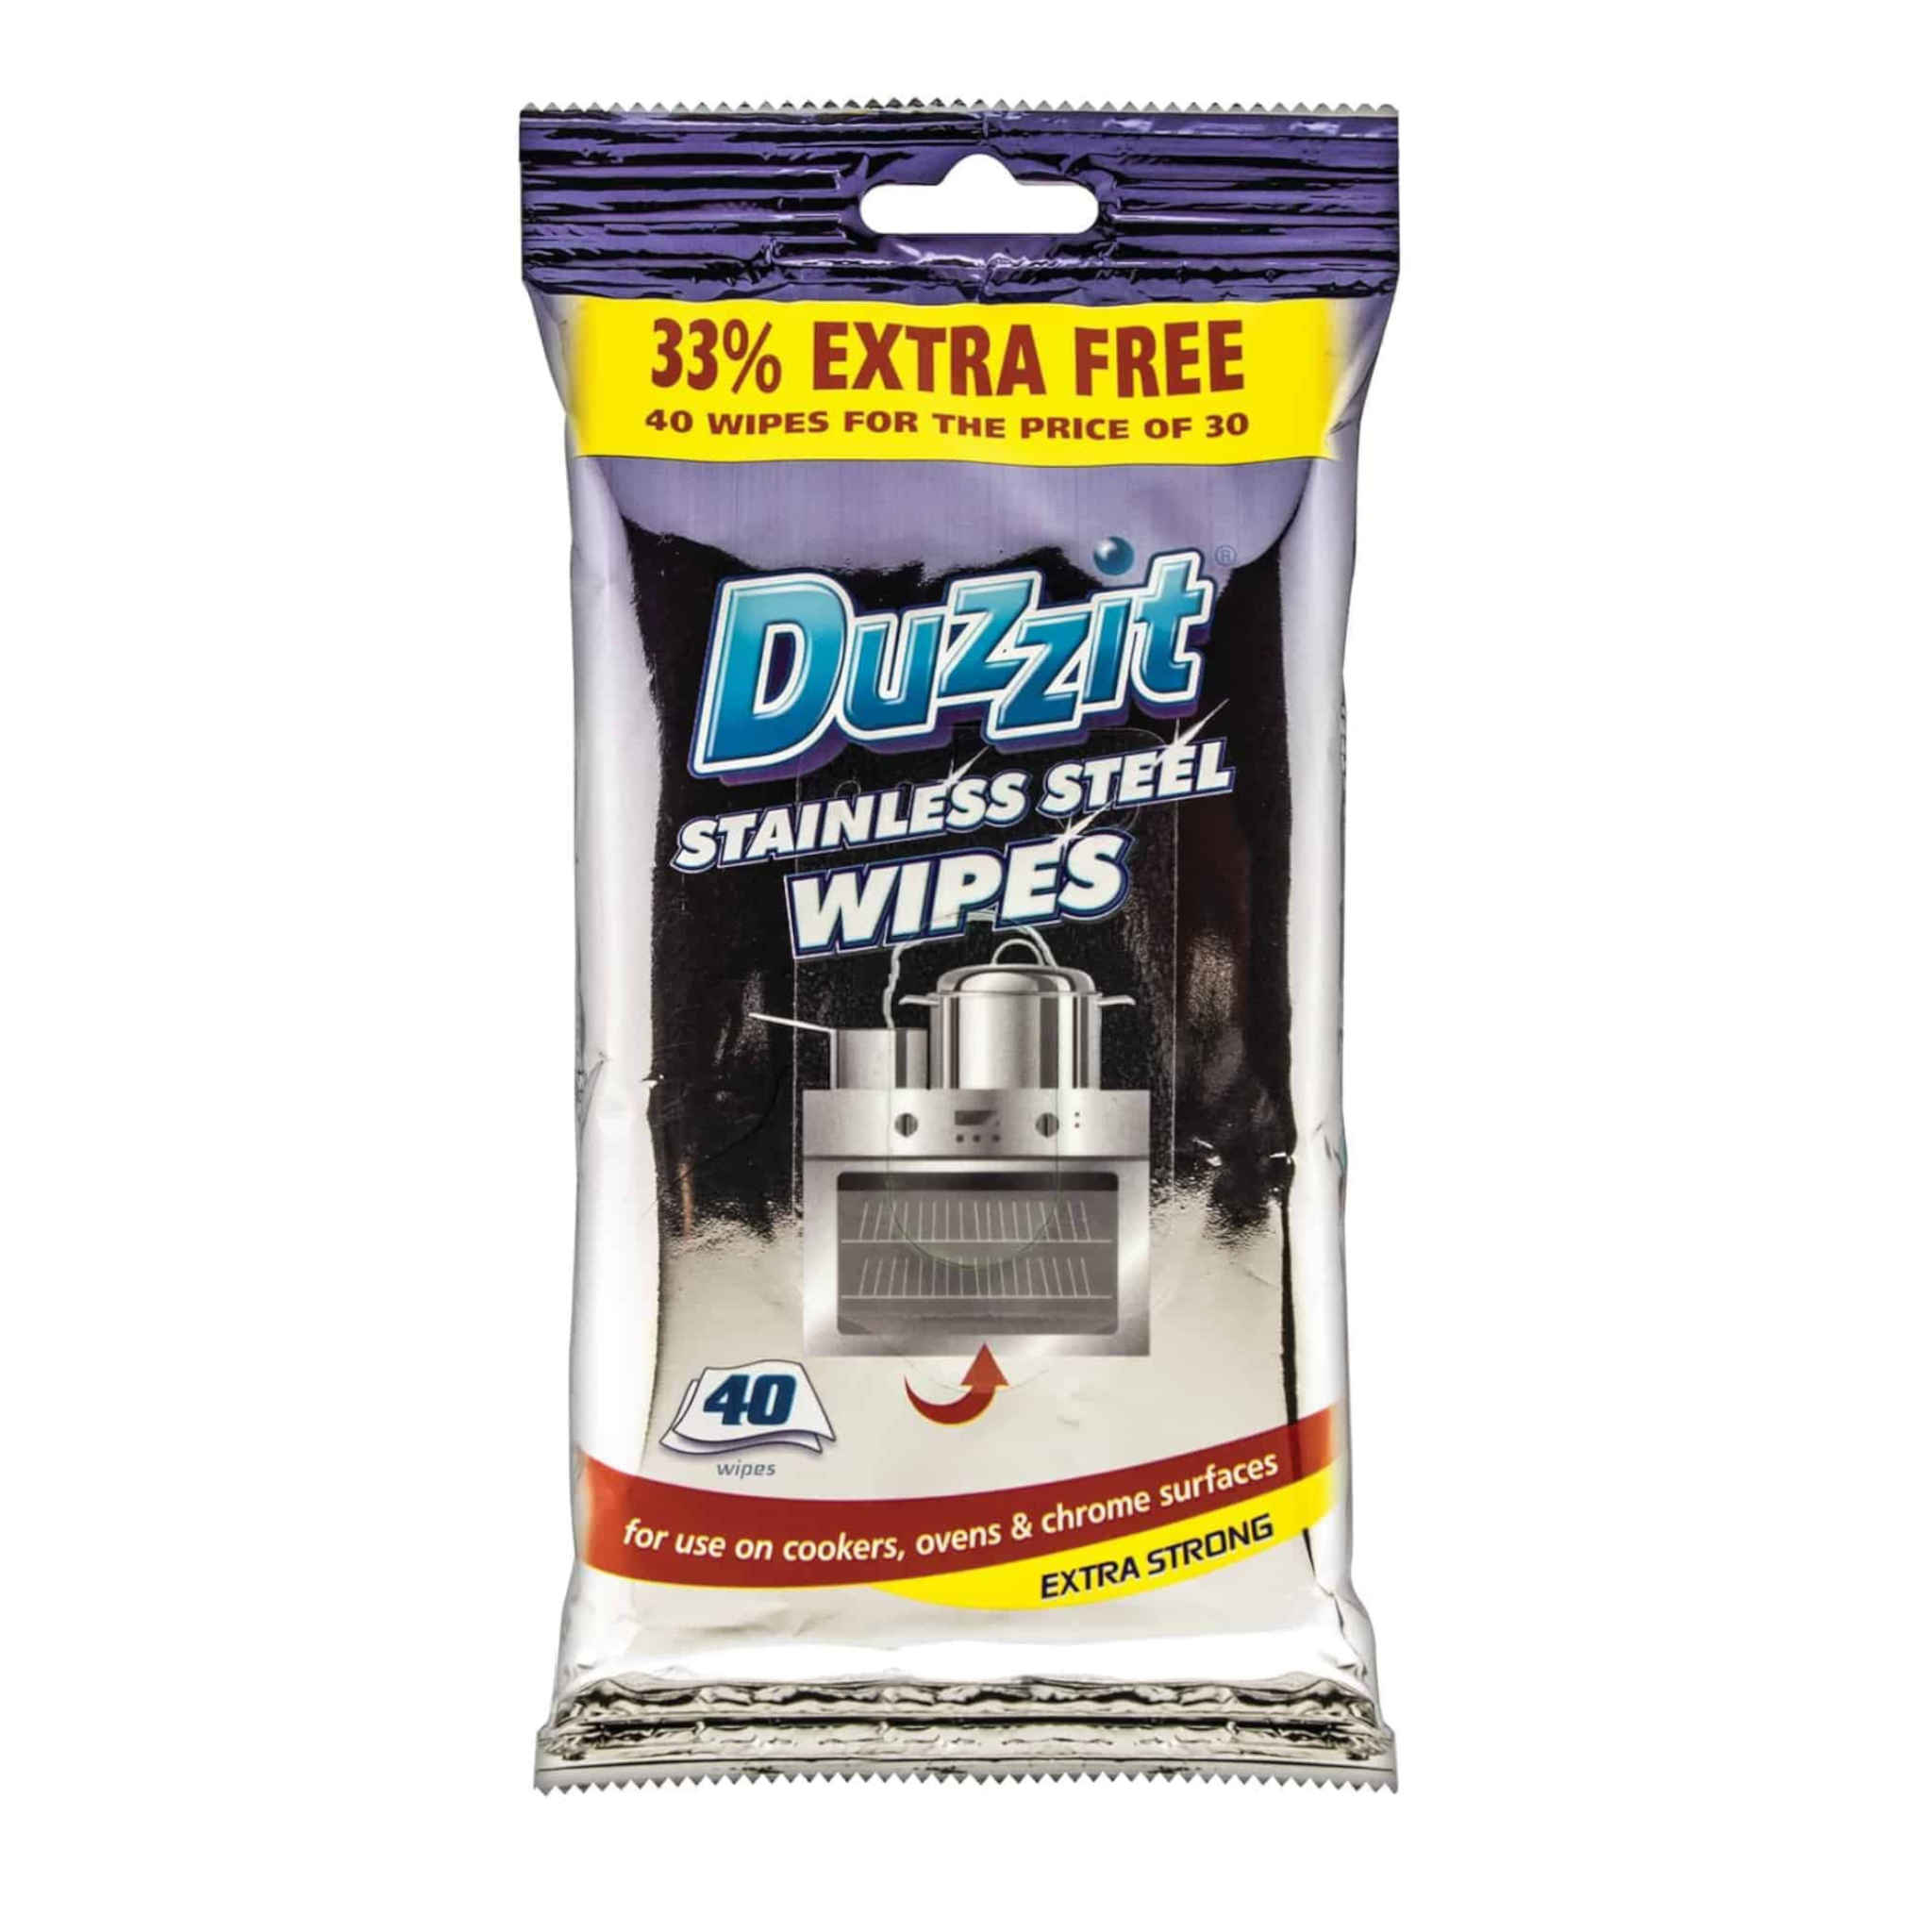 Duzzit Stainless Steel Wipes Jumbo Wipes | 40 Pack